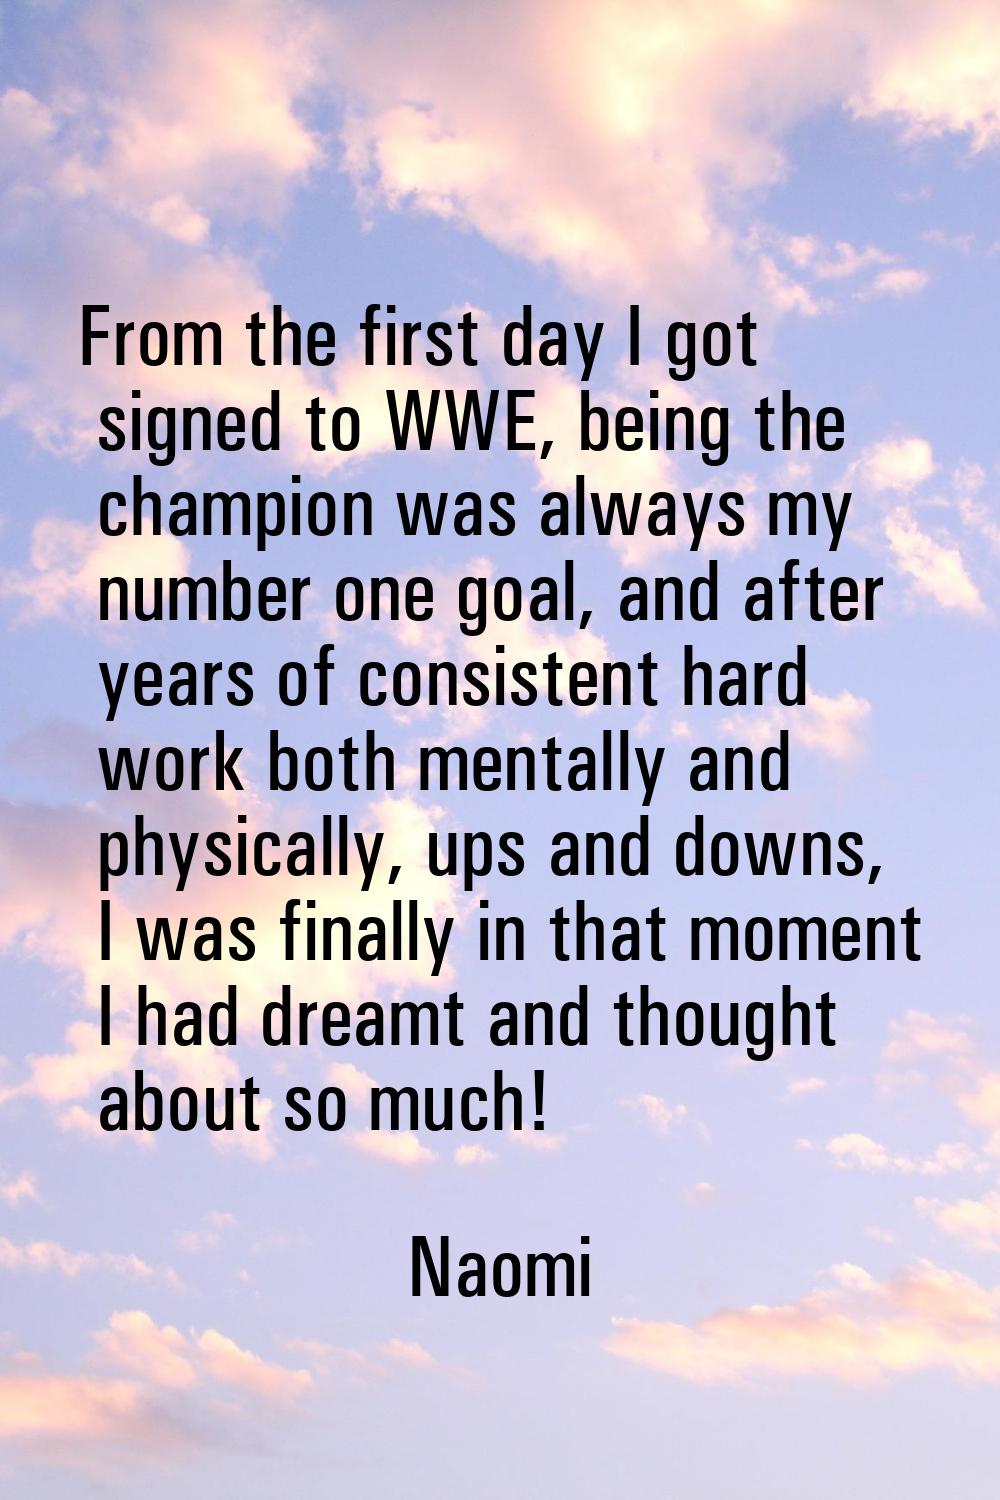 From the first day I got signed to WWE, being the champion was always my number one goal, and after